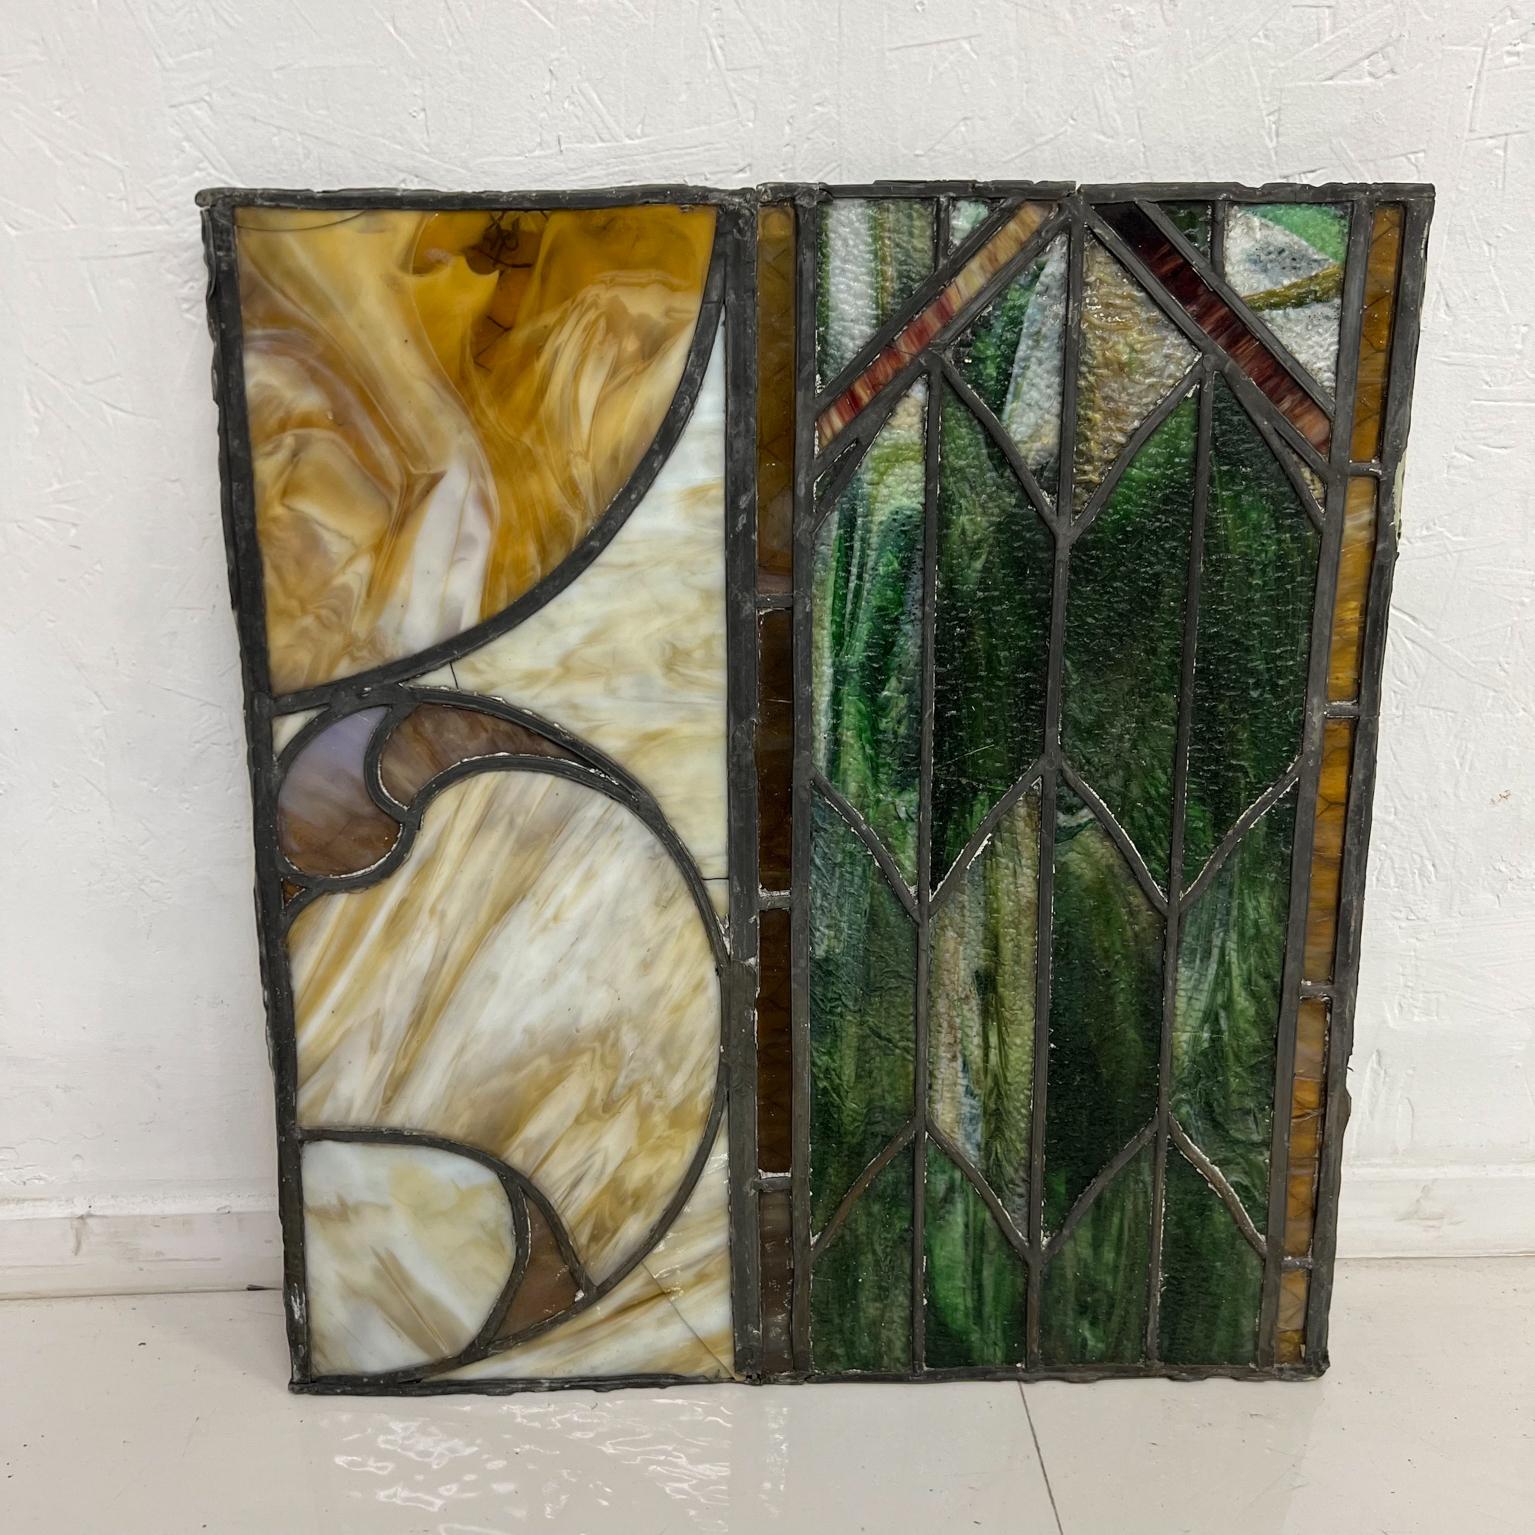 1980s Elegantly colored stained-glass window panel stunning Handcrafted Vintage
21.5 x 23.13 tall x Stain Lead Glass
Preowned original unrestored vintage condition.
See images provided please.
 